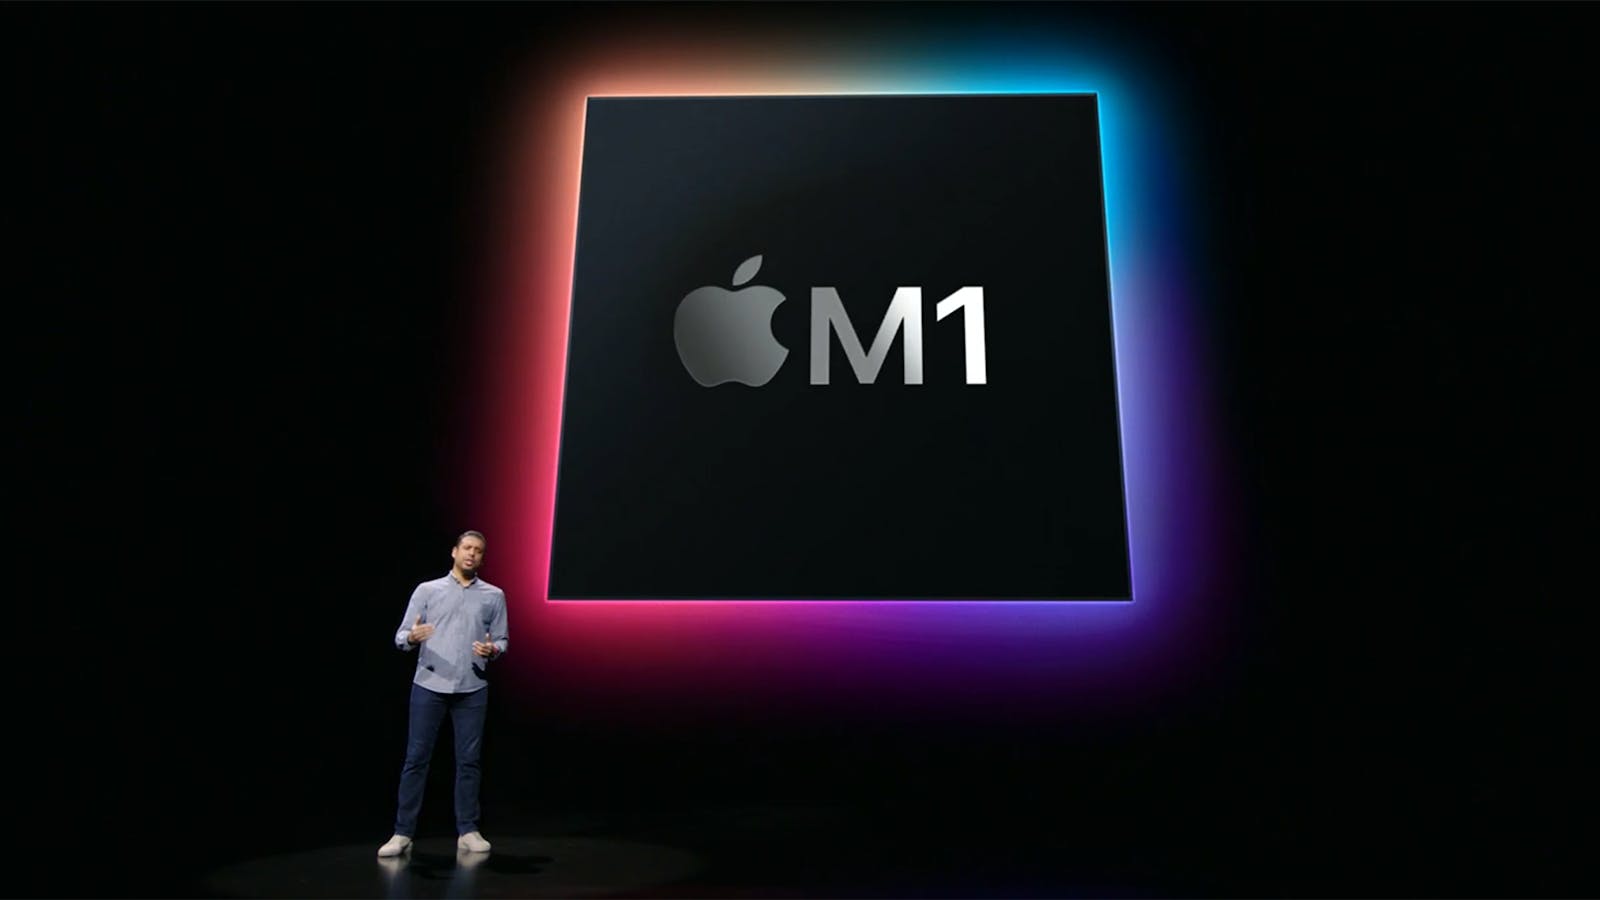 Apple's Raja Bose discusses Apple's M1 chip at the company's spring event on Tuesday. Screenshot via Apple.com